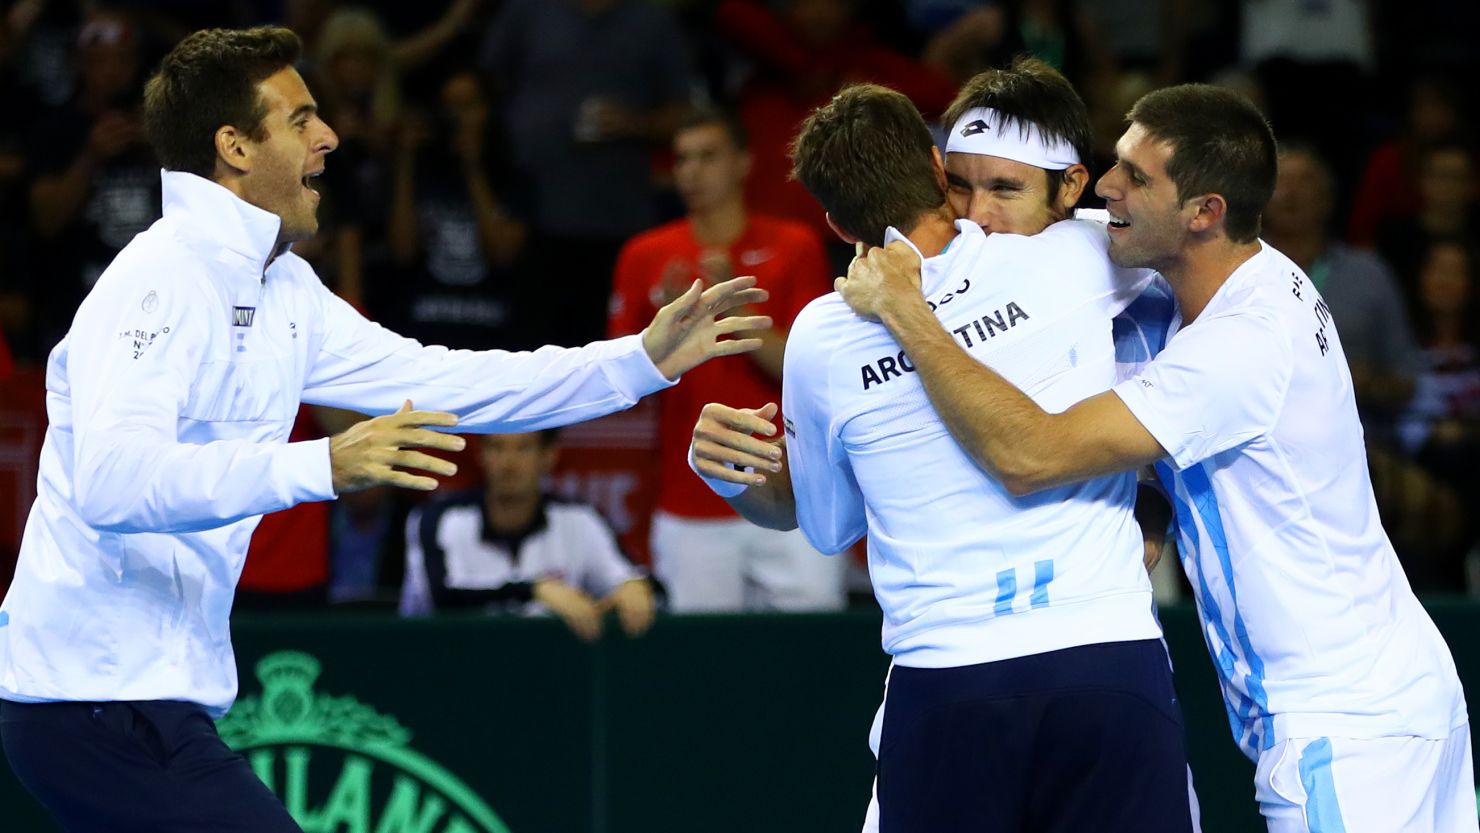  Argentina's tennis players celebrate Mayer's decisive victory in the Davis Cup semifinal against Britain.  